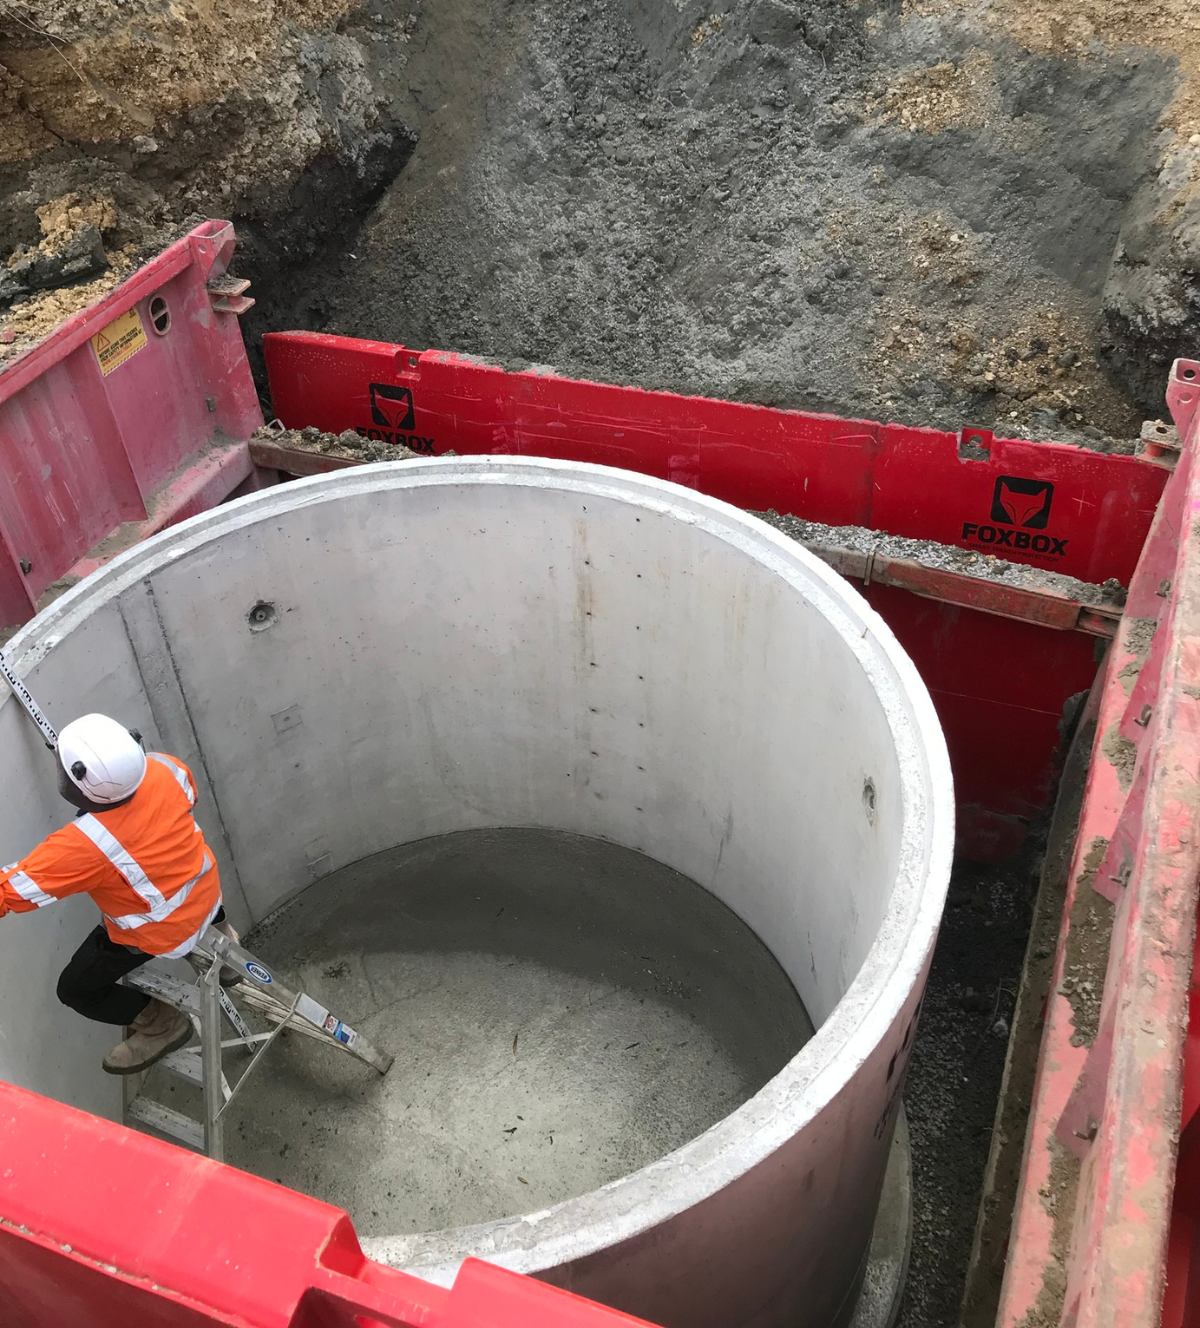 Contractor working on installation of large concrete stormwater pipes